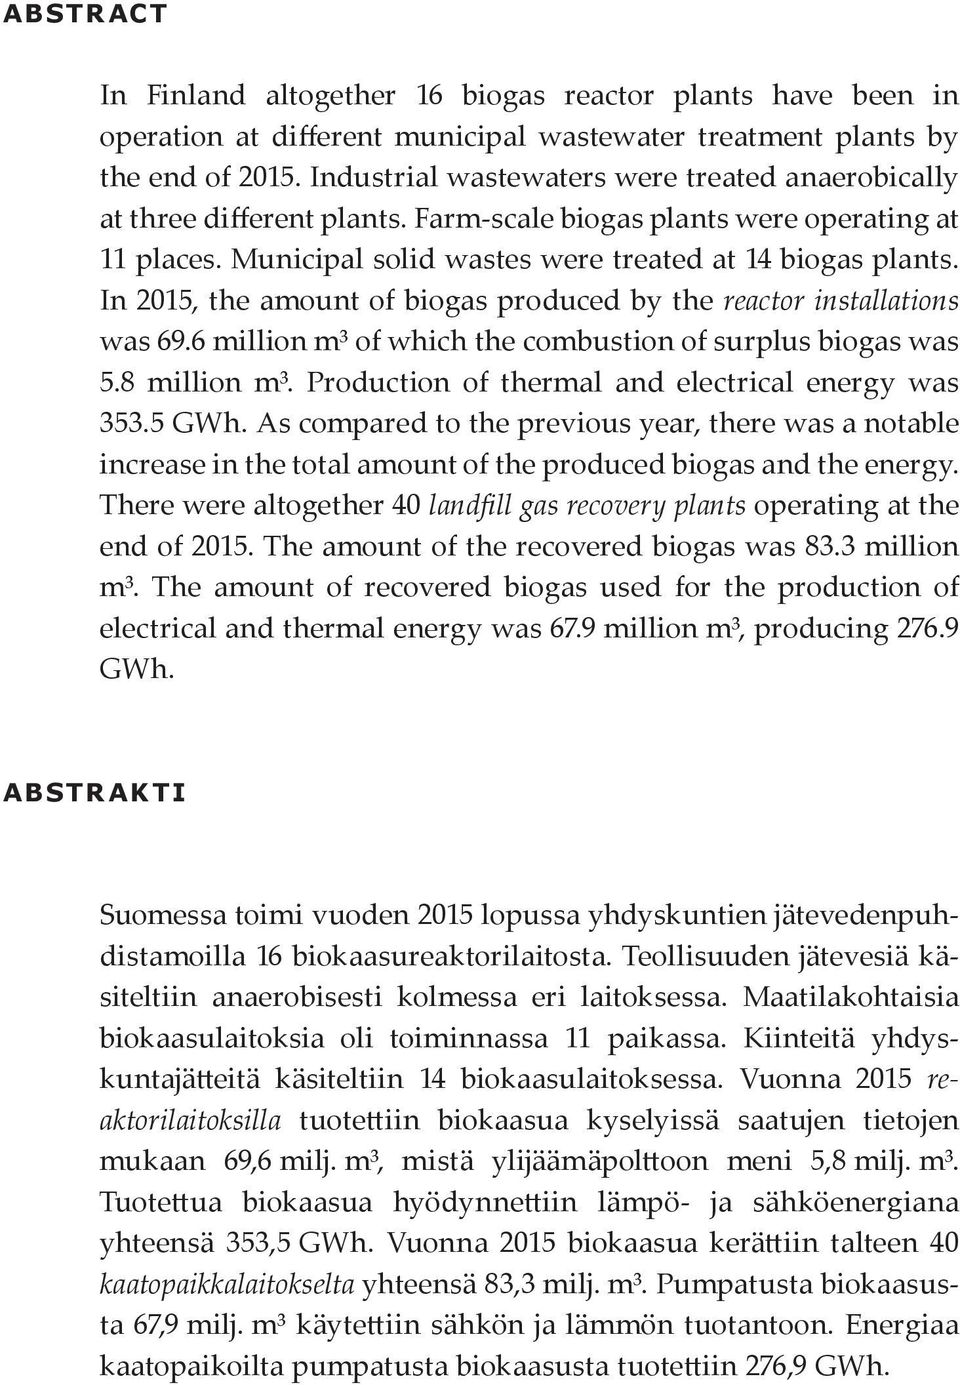 In 2015, the amount of biogas produced by the reactor installations was 69.6 million m³ of which the combustion of surplus biogas was 5.8 million m³.